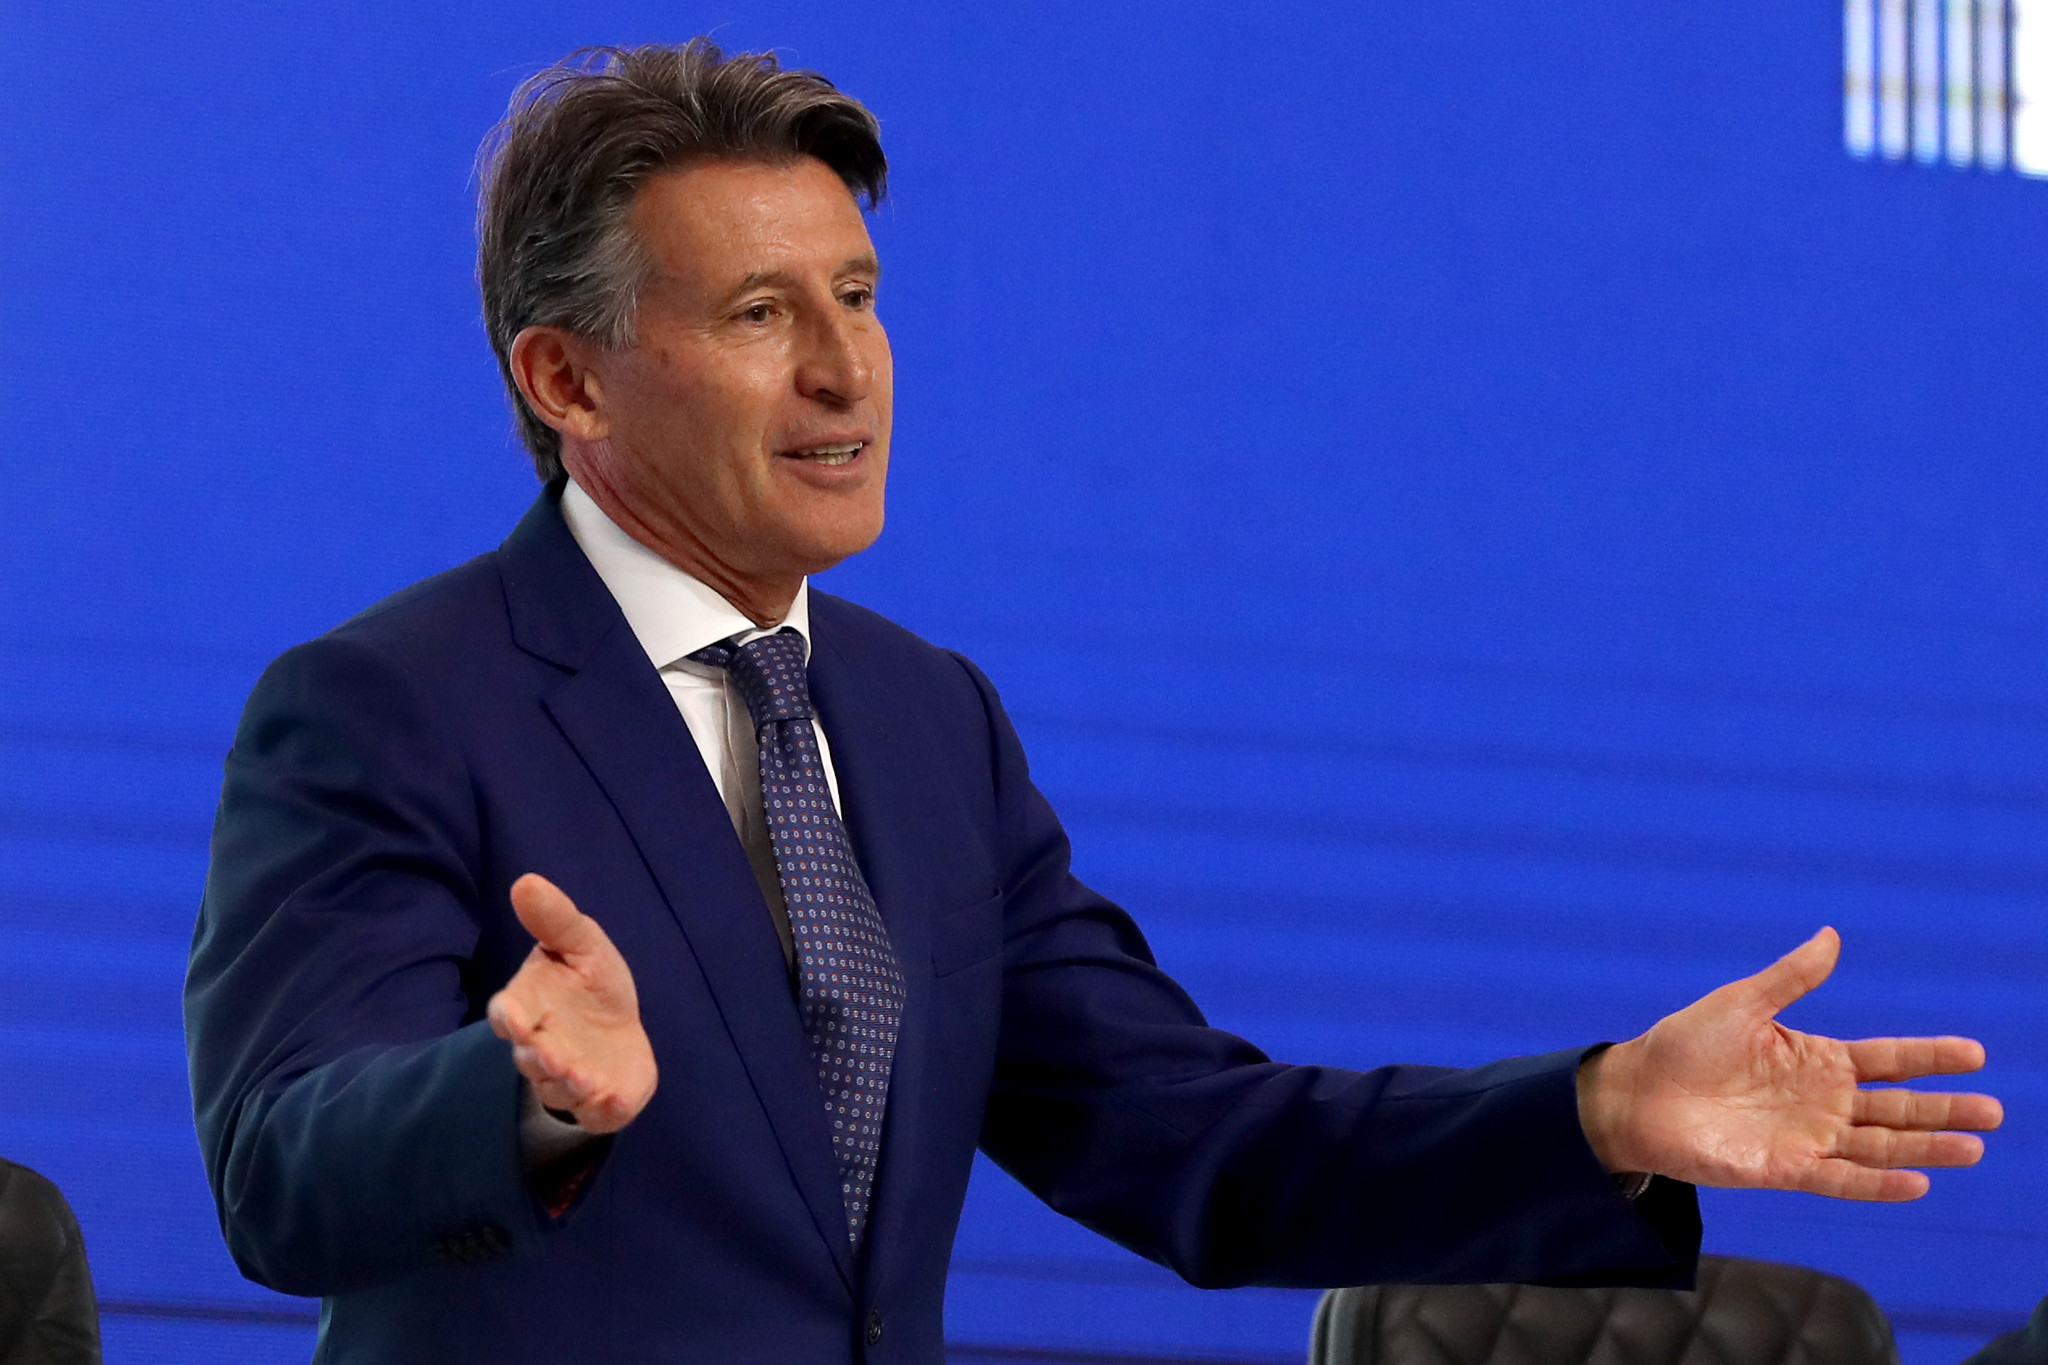 Sebastian Coe believes cross country is better suited to the Winter Olympics, not the Summer Games ©Getty Images